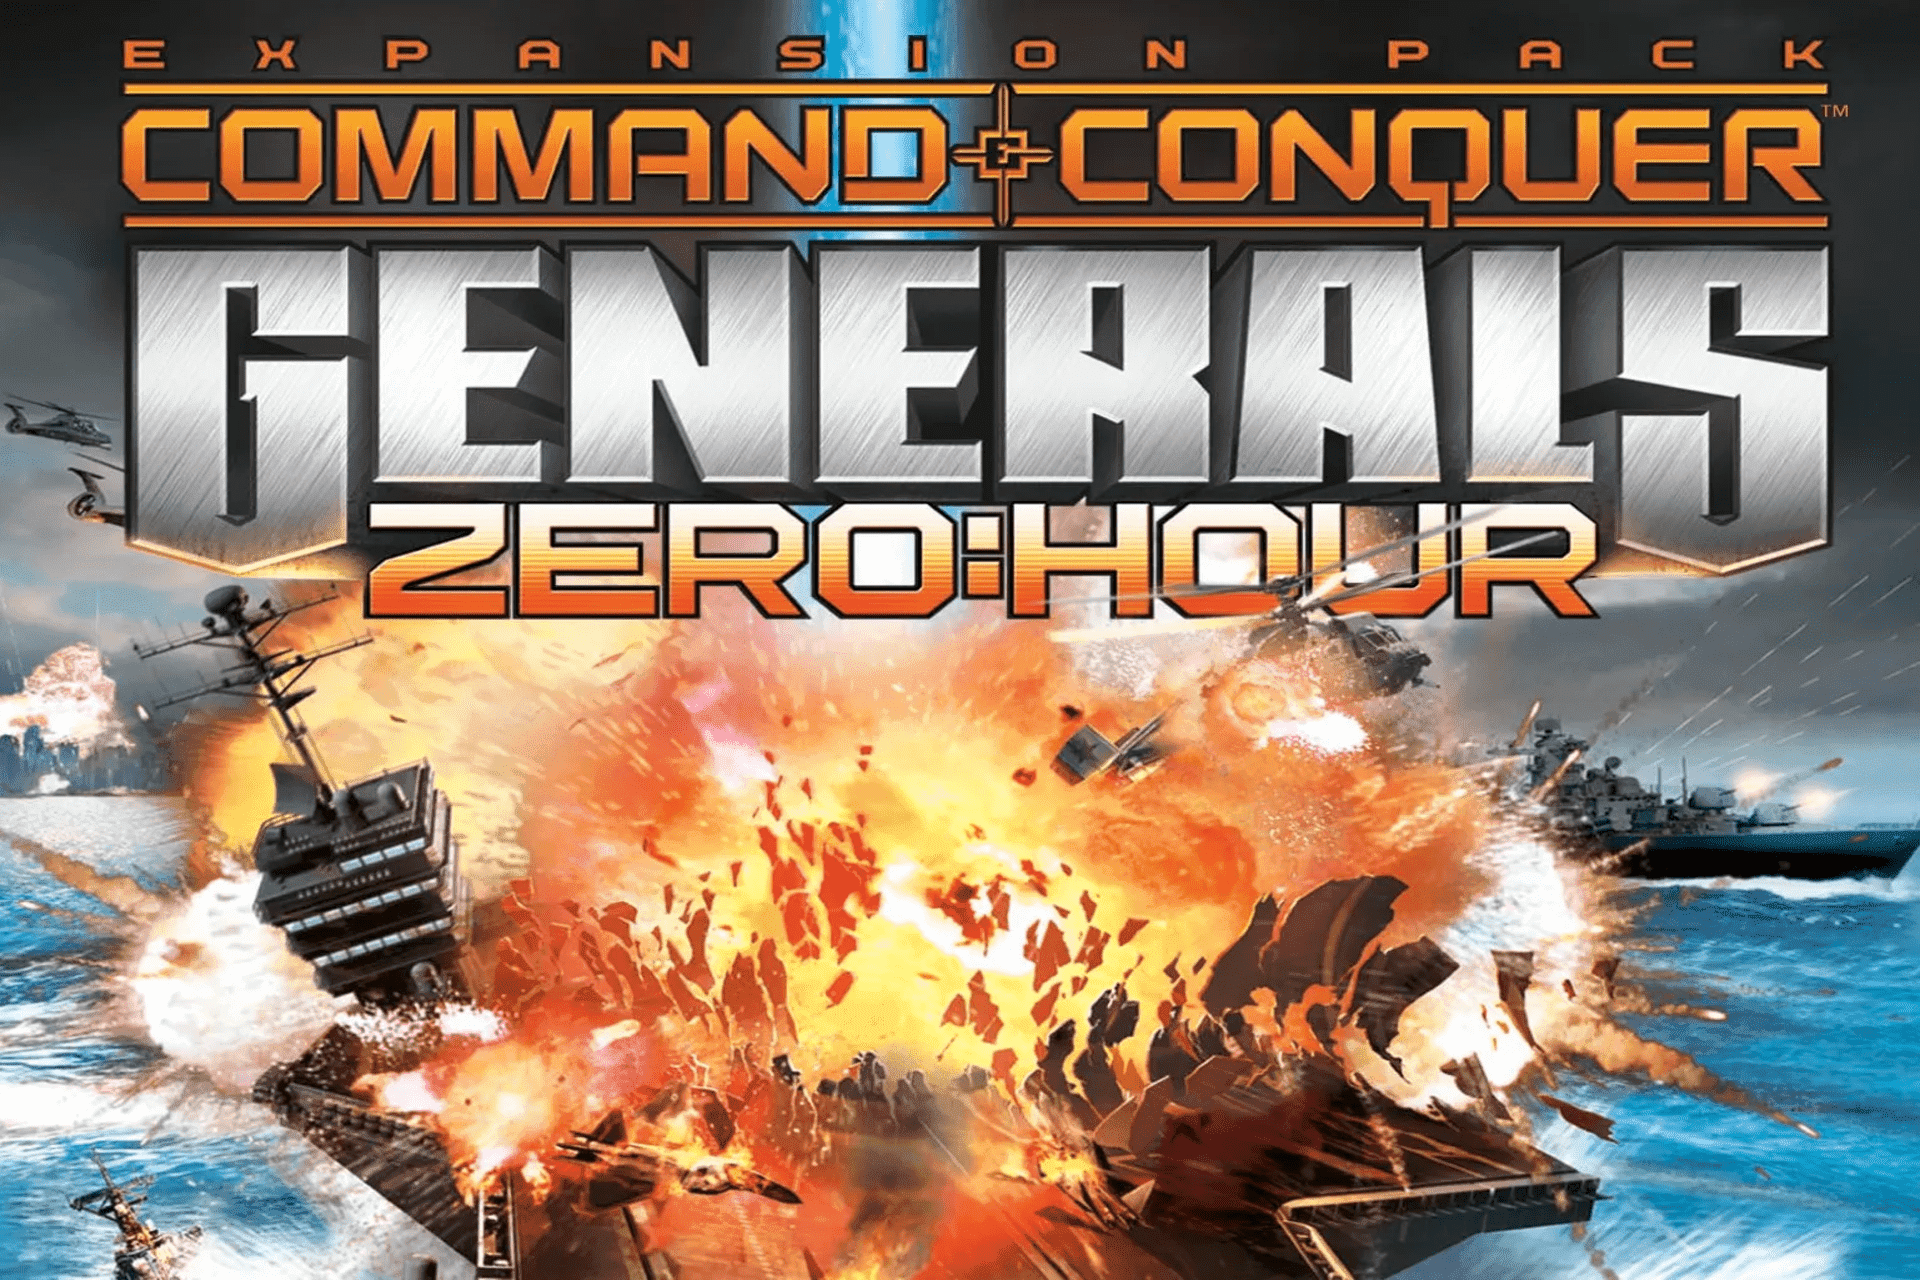 Command and conquer generals free download windows 10 download chrome windows server 2012 r2